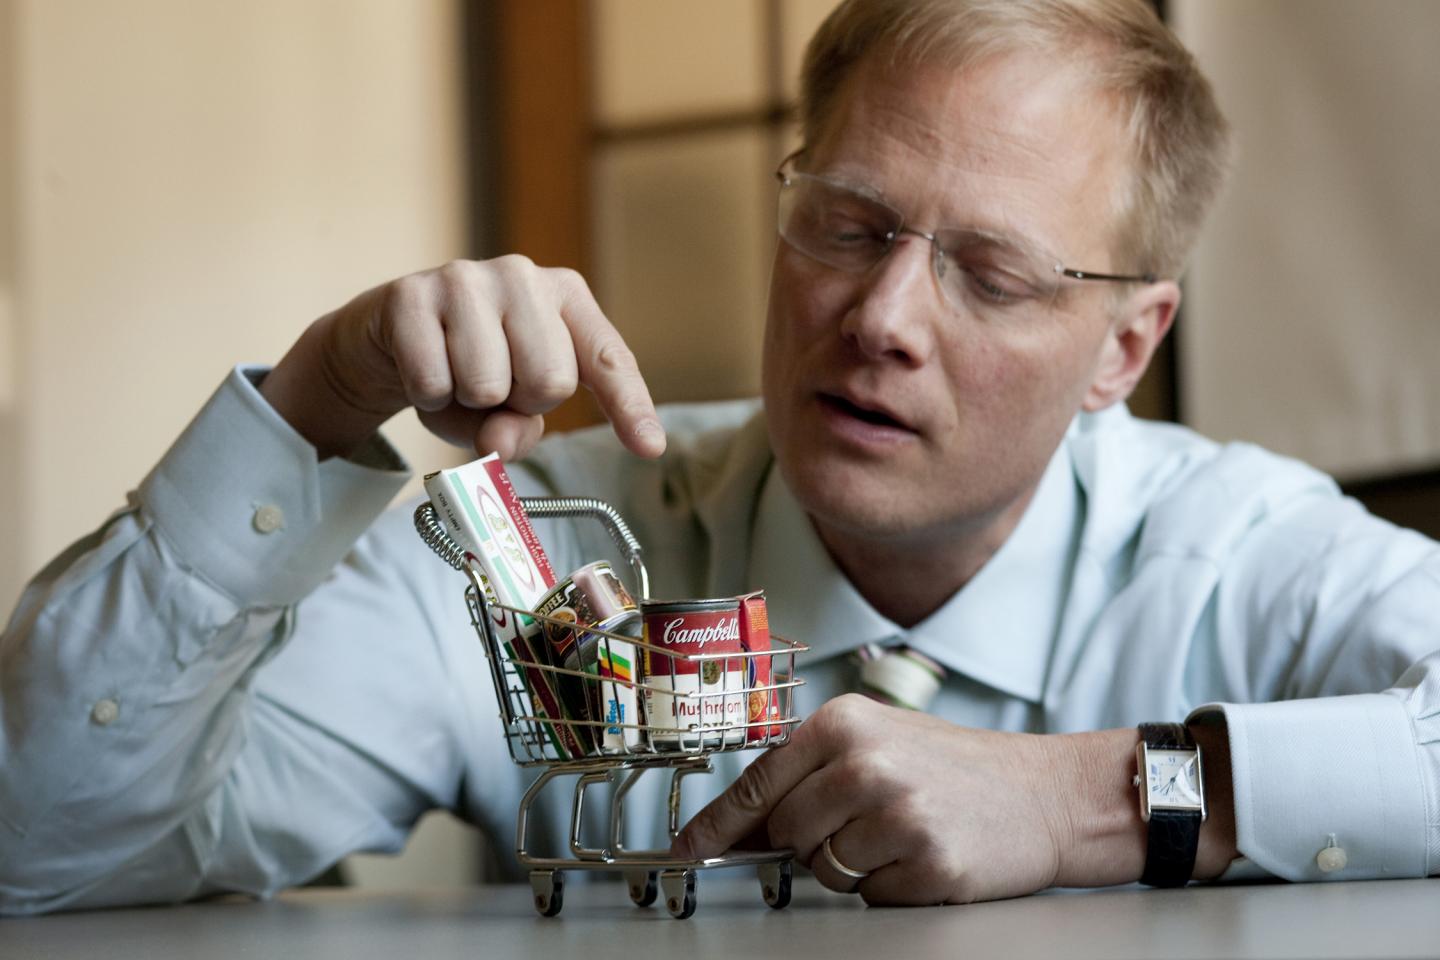 Brian Wansink, Ph.D., Cornell Food and Brand Lab